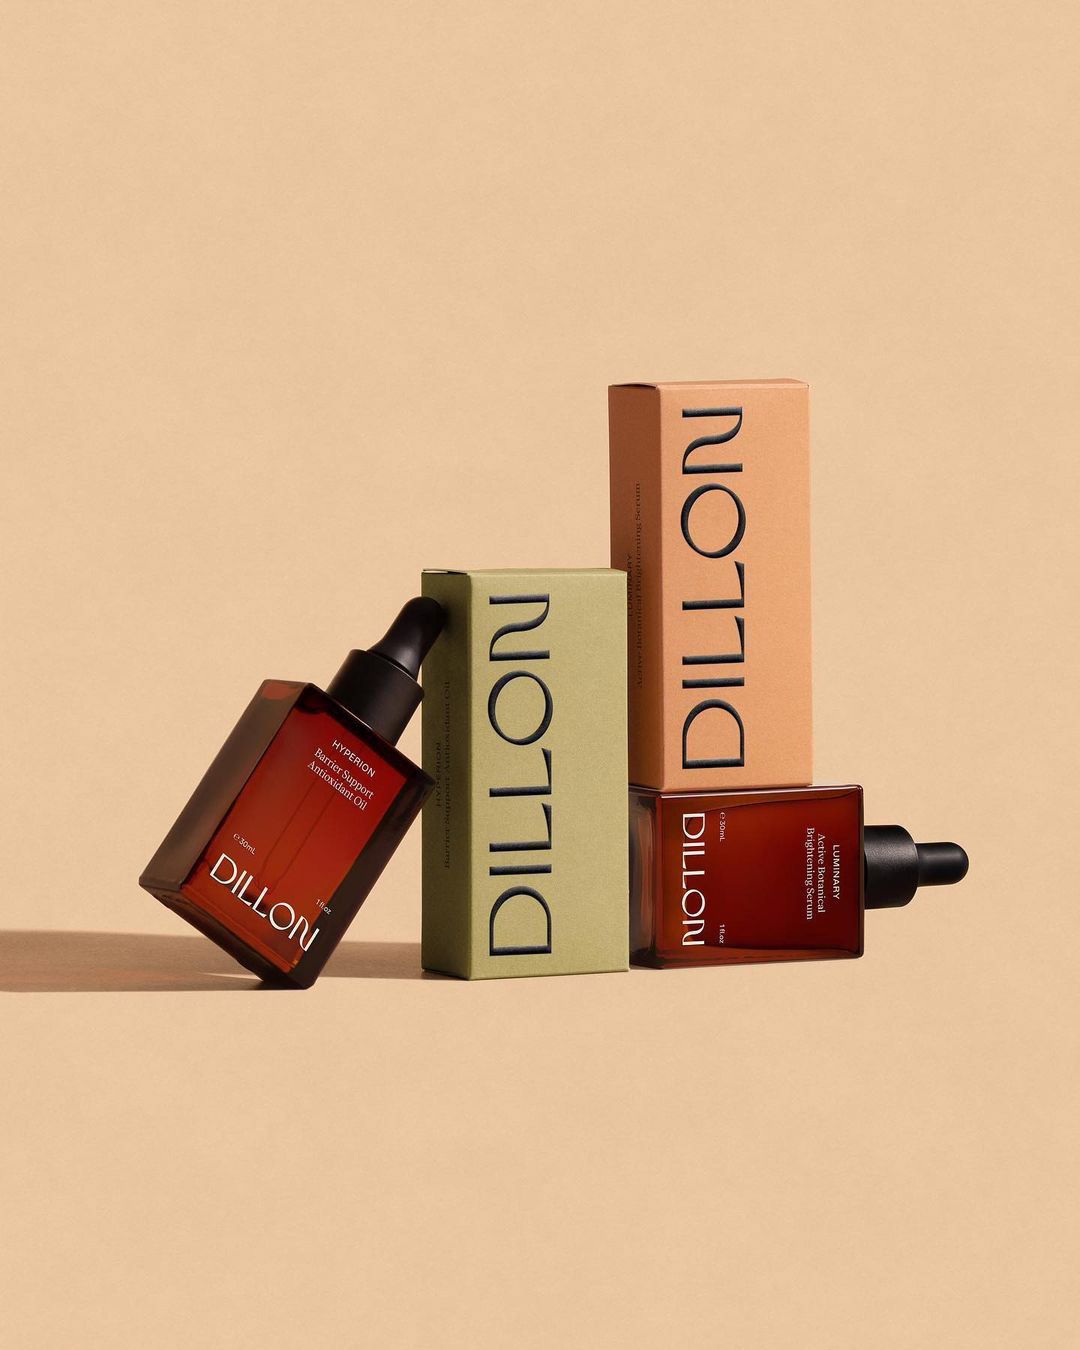 Dillon skincare products lean against Dillon skincare product boxes by porter packaging